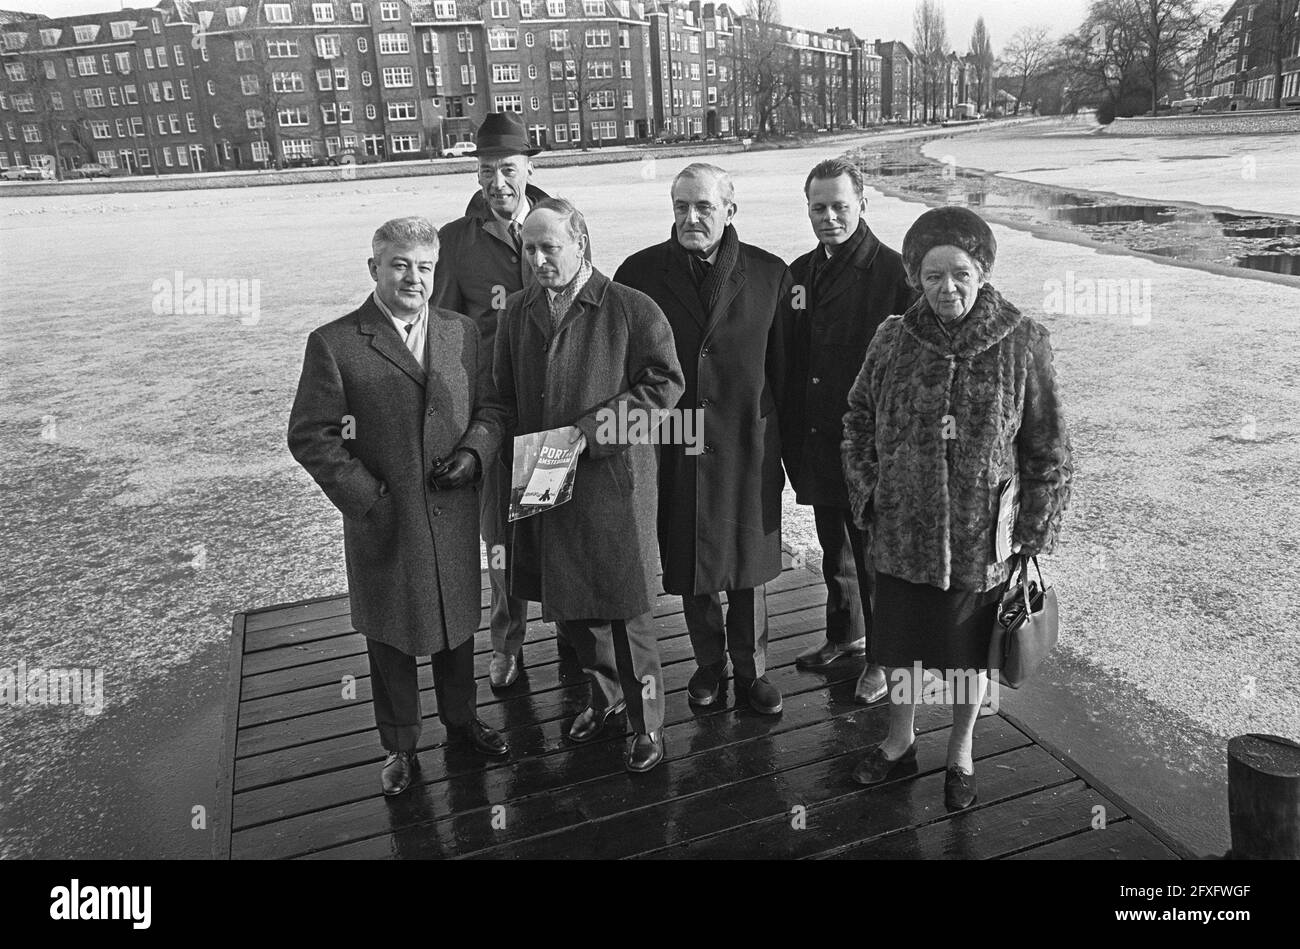 From left to right architect Prof. H. Schader, architect Huig Maaskant, city architect Chris Nielsen, J. Pedersen (Copenhagen city architect), architect Frans van Gool and urban planner Ms. Jacoba (Ko) Mulder, January 13, 1968, architects, juries, urban planners, The Netherlands, 20th century press agency photo, news to remember, documentary, historic photography 1945-1990, visual stories, human history of the Twentieth Century, capturing moments in time Stock Photo